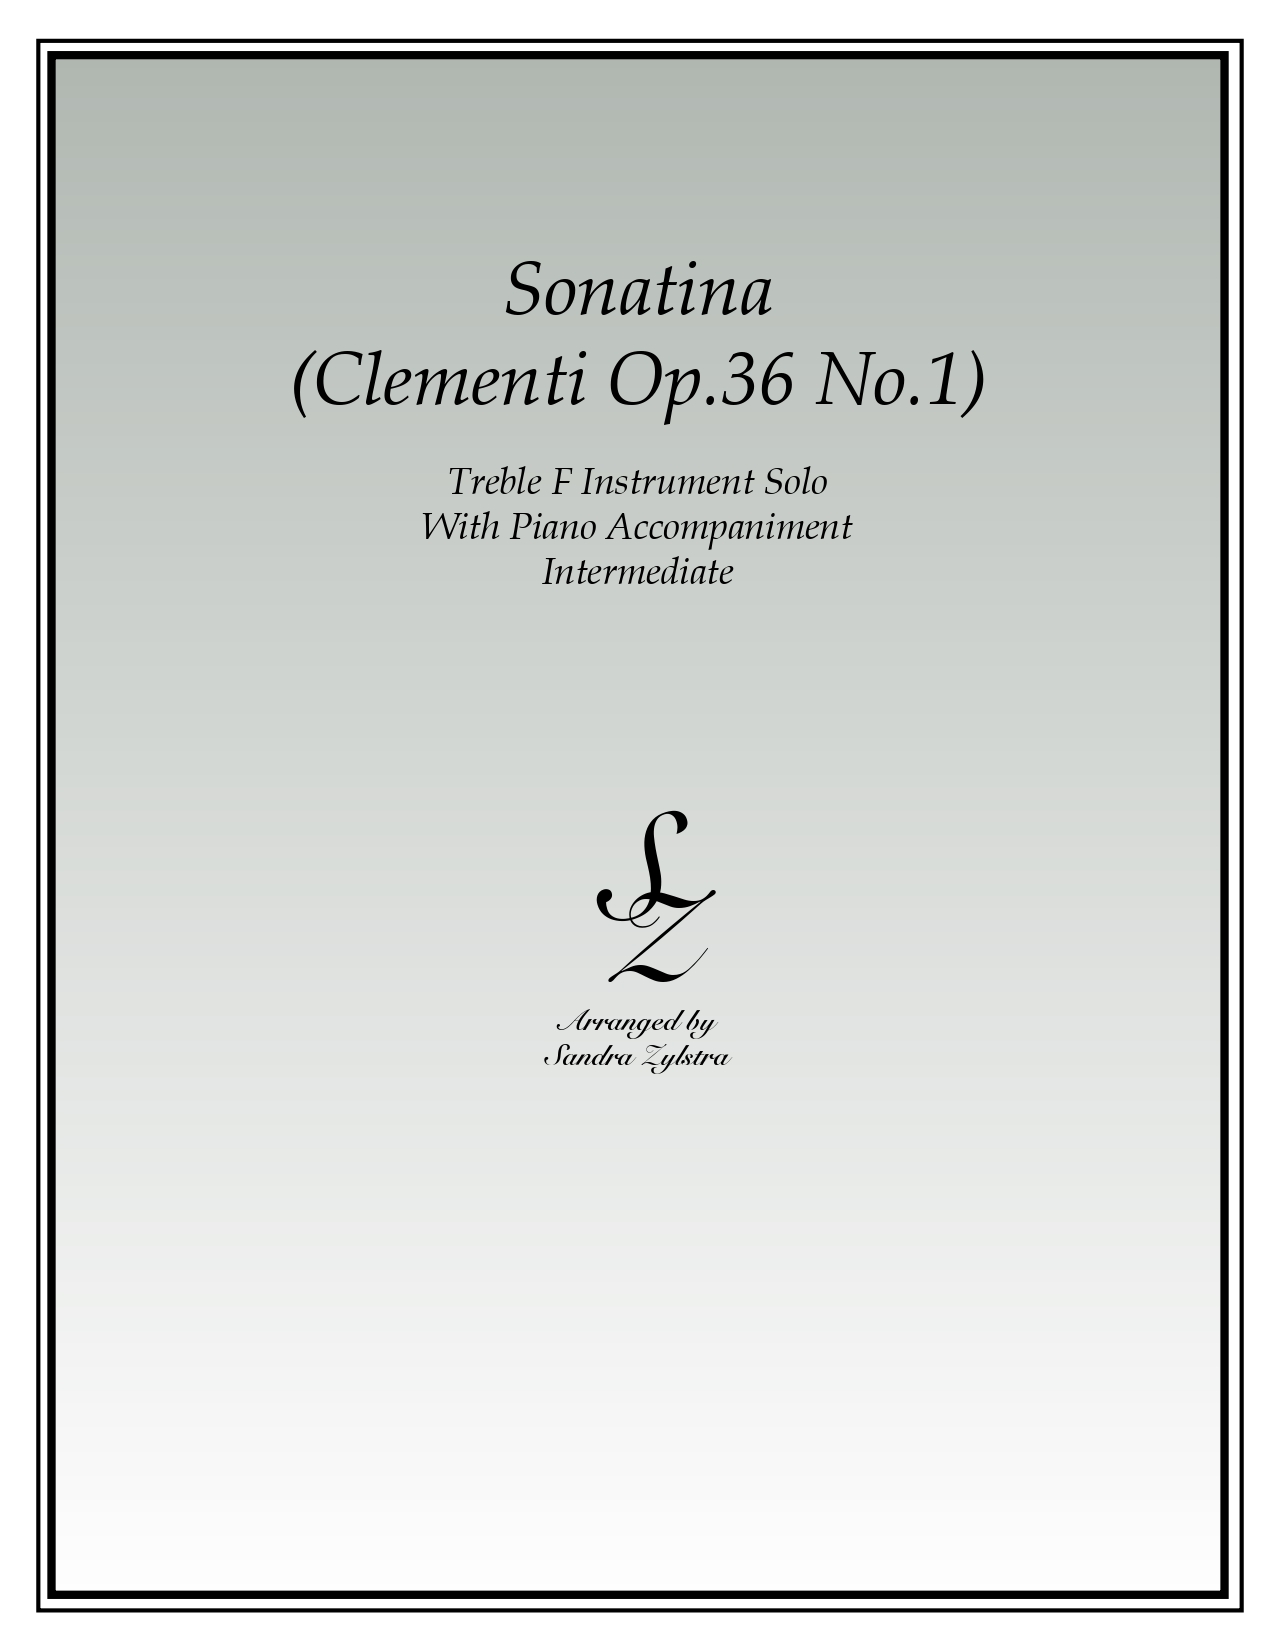 Sonatina Clementi Op.36 No. 1 F instrument solo part cover page 00011